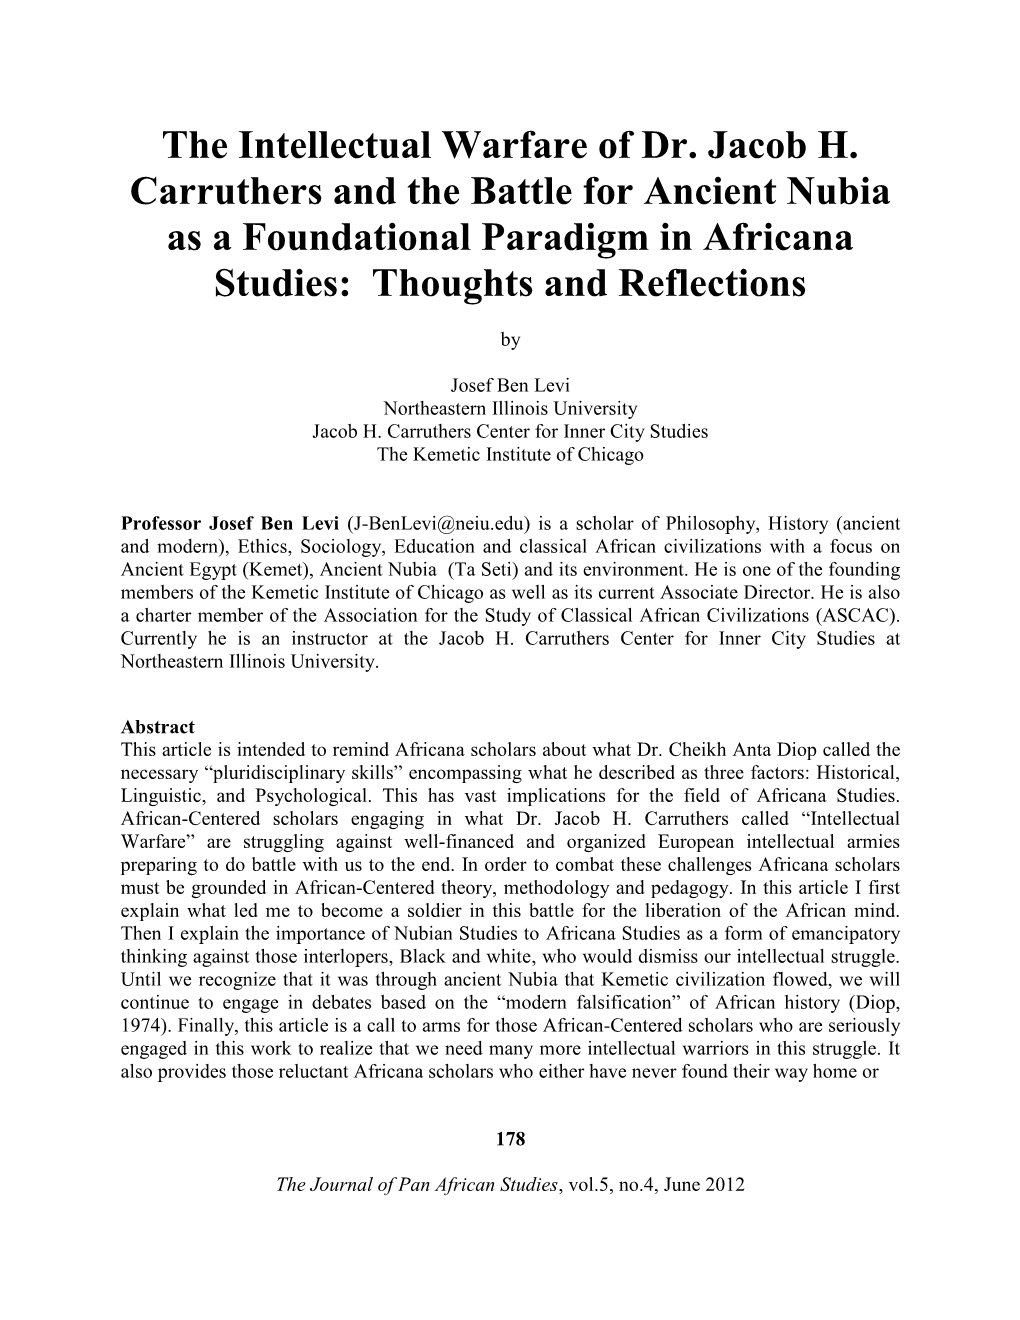 The Intellectual Warfare of Dr. Jacob H. Carruthers and the Battle for Ancient Nubia As a Foundational Paradigm in Africana Studies: Thoughts and Reflections